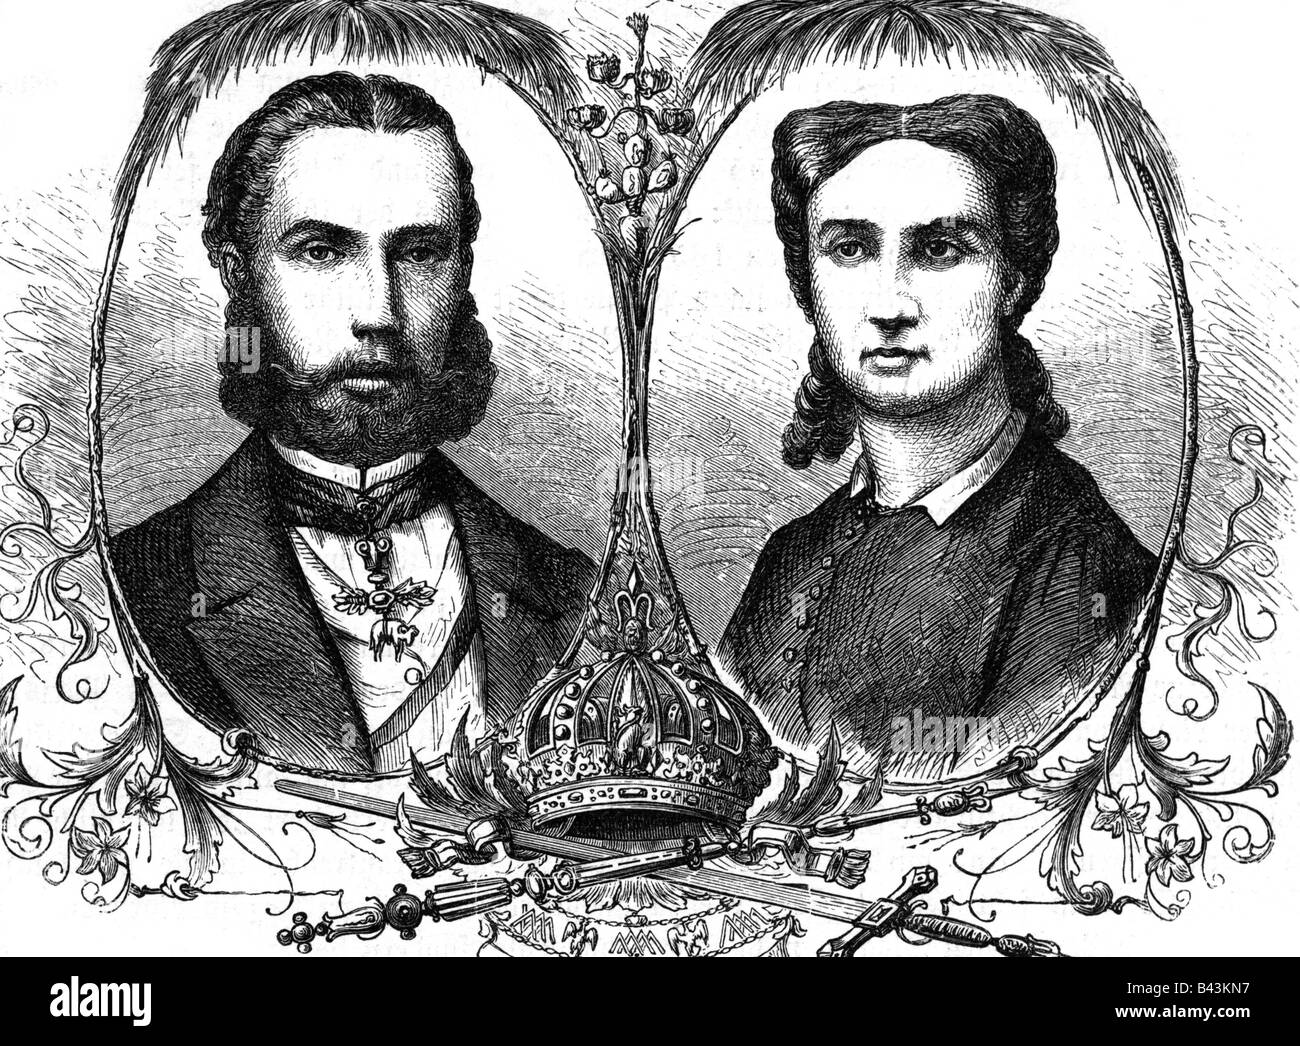 Maximilian I, 6.6.1832 - 19.6.1867, Emperor of Mexico 10.4.1864 - 14.5.1867, with wife Empress Charlotte, portraits, wood engraving, circa 1865, Stock Photo